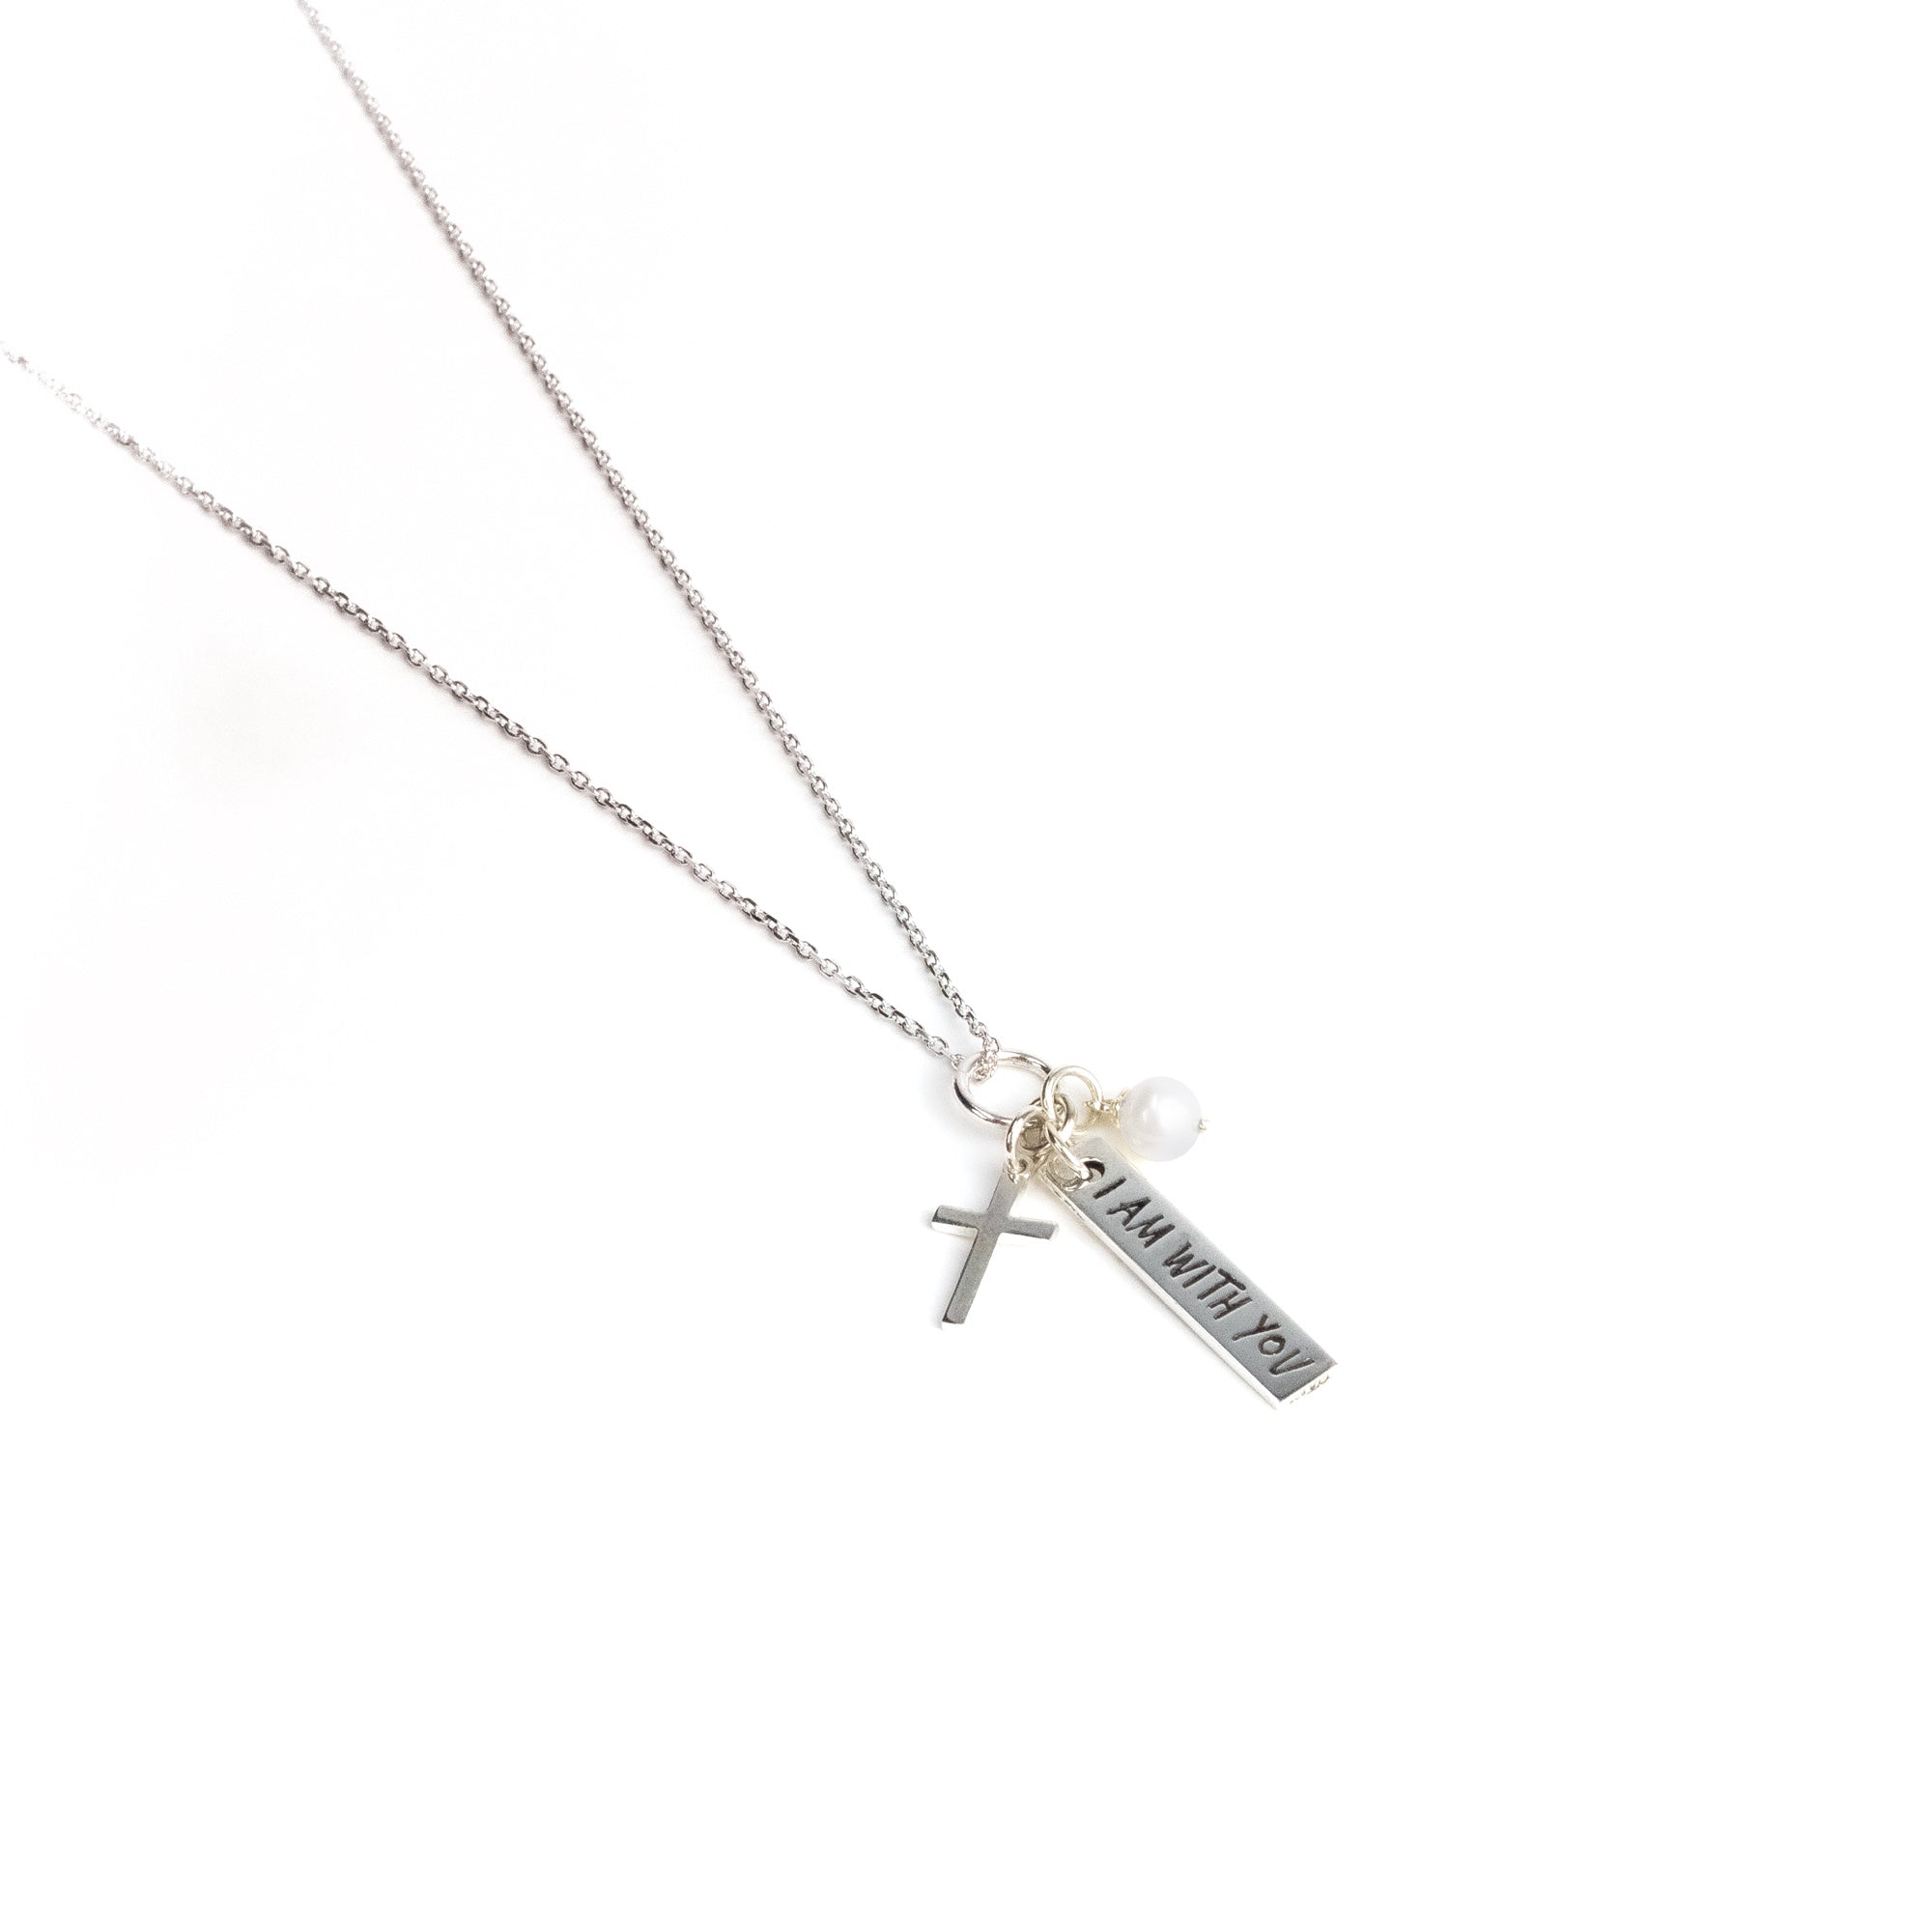 I Am With You, Sterling Silver Scripture Cross Necklace